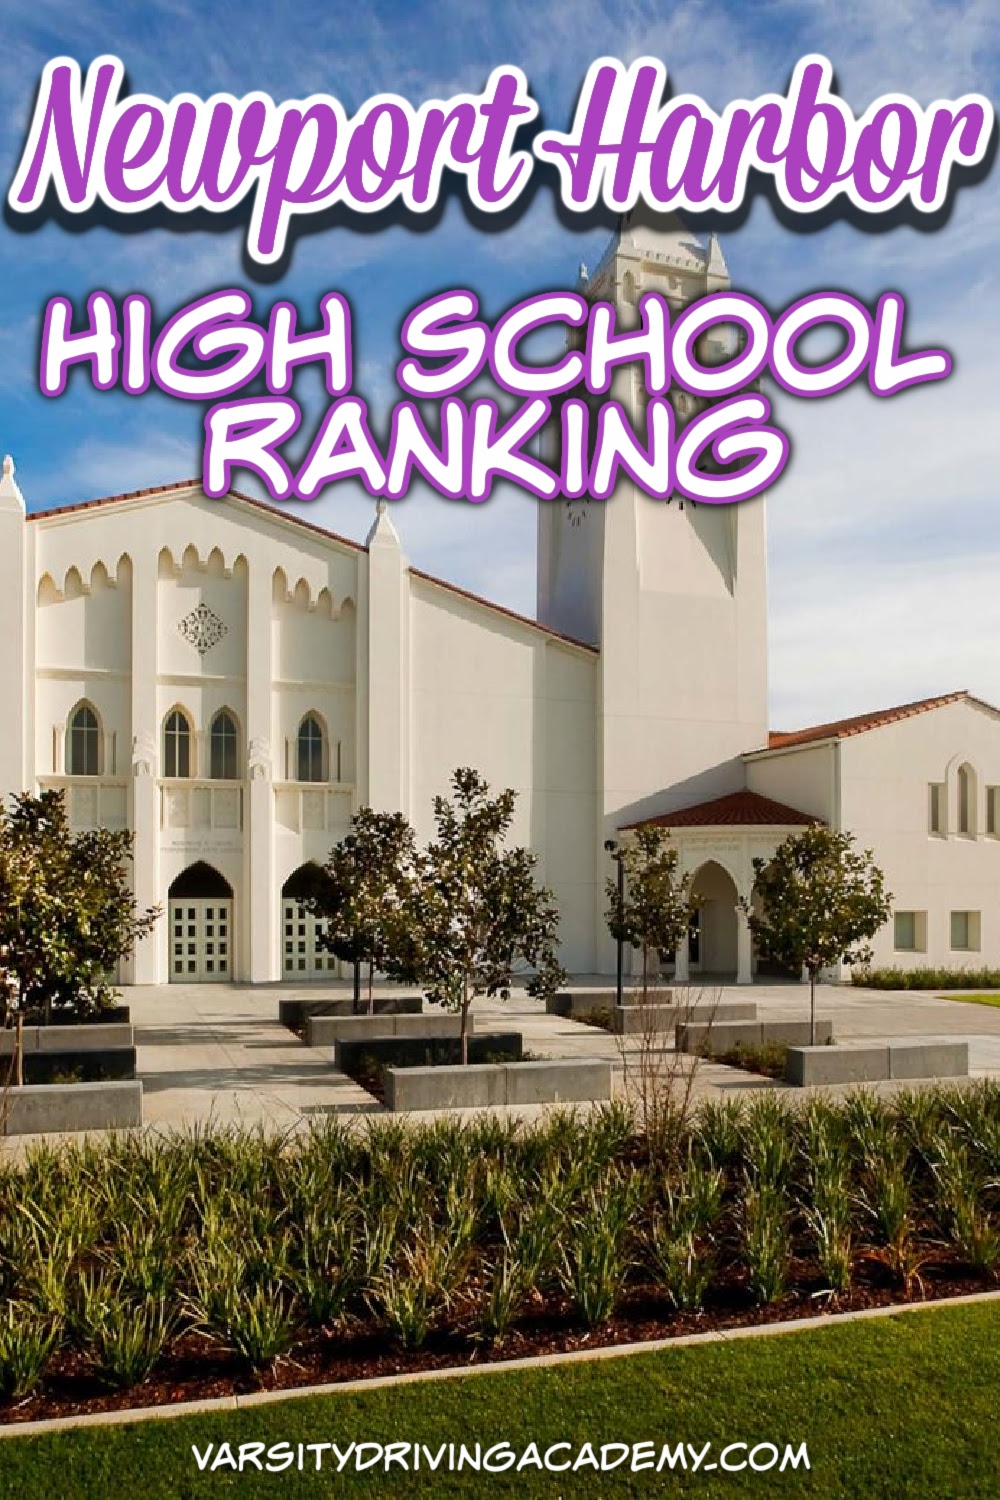 Newport Harbor High School has a ranking that reflects the beauty and luxury that Newport is known for amongst residents and visitors.